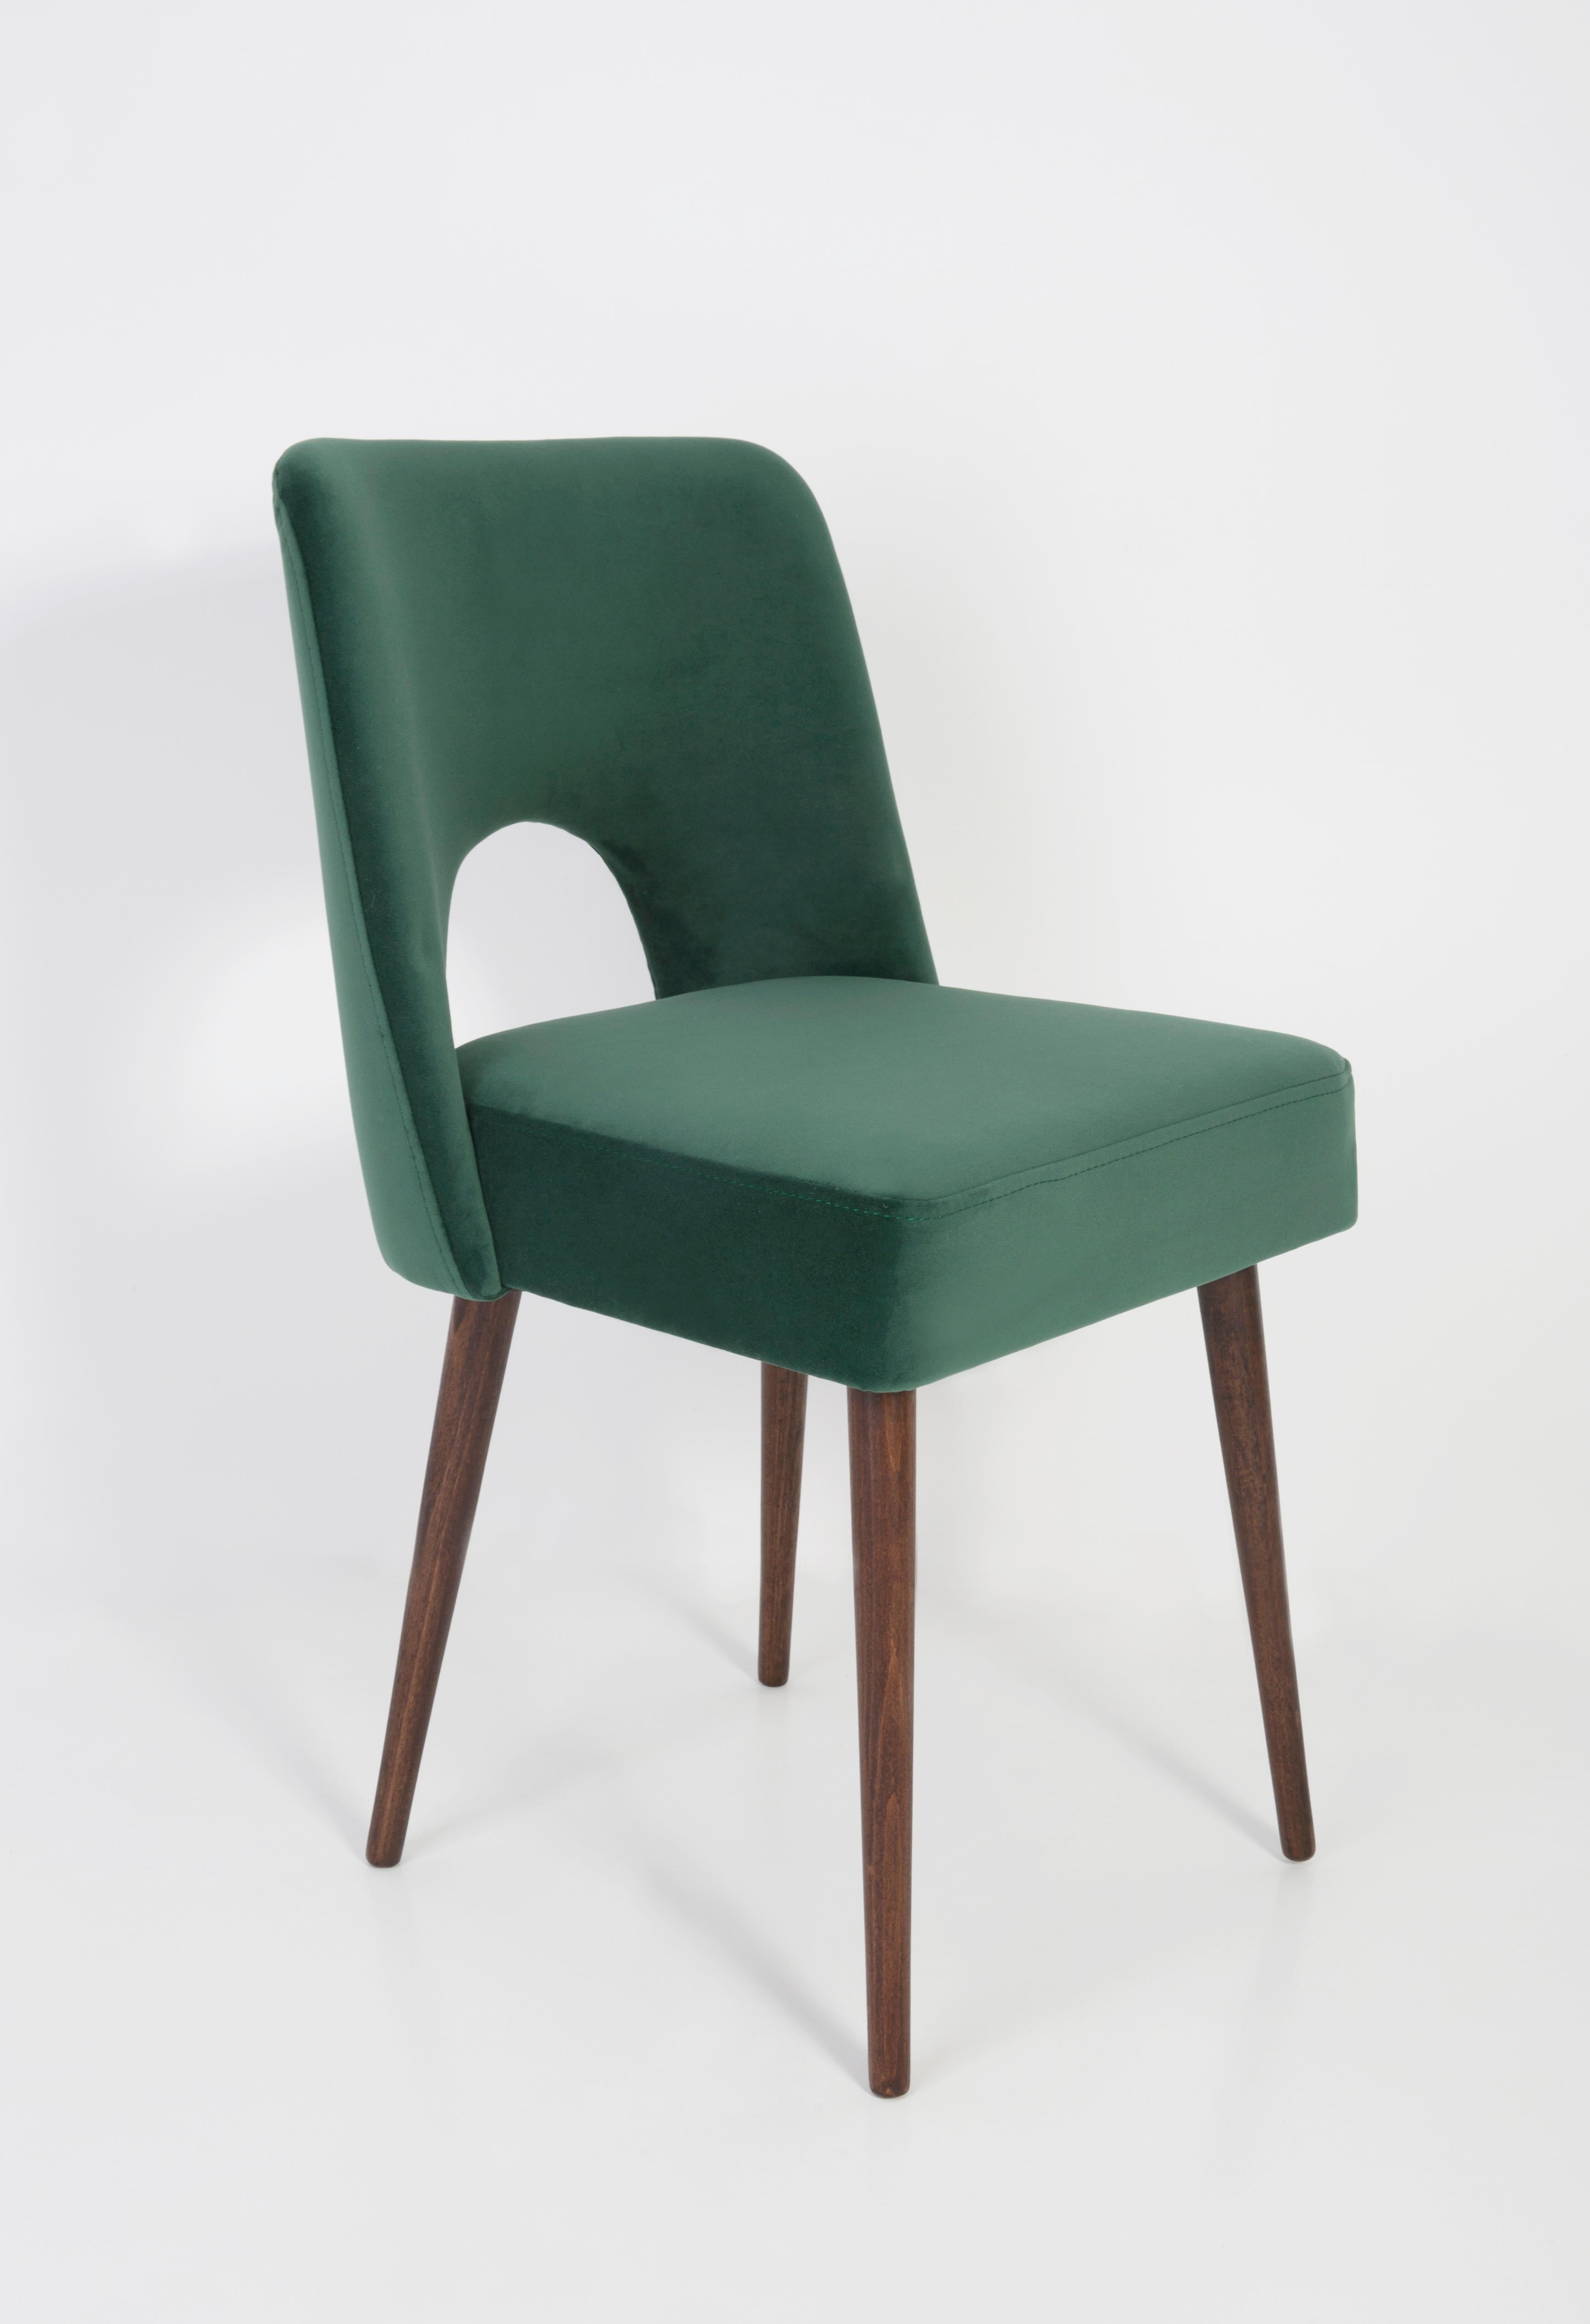 Beautiful chairs type 1020 colloquially called 